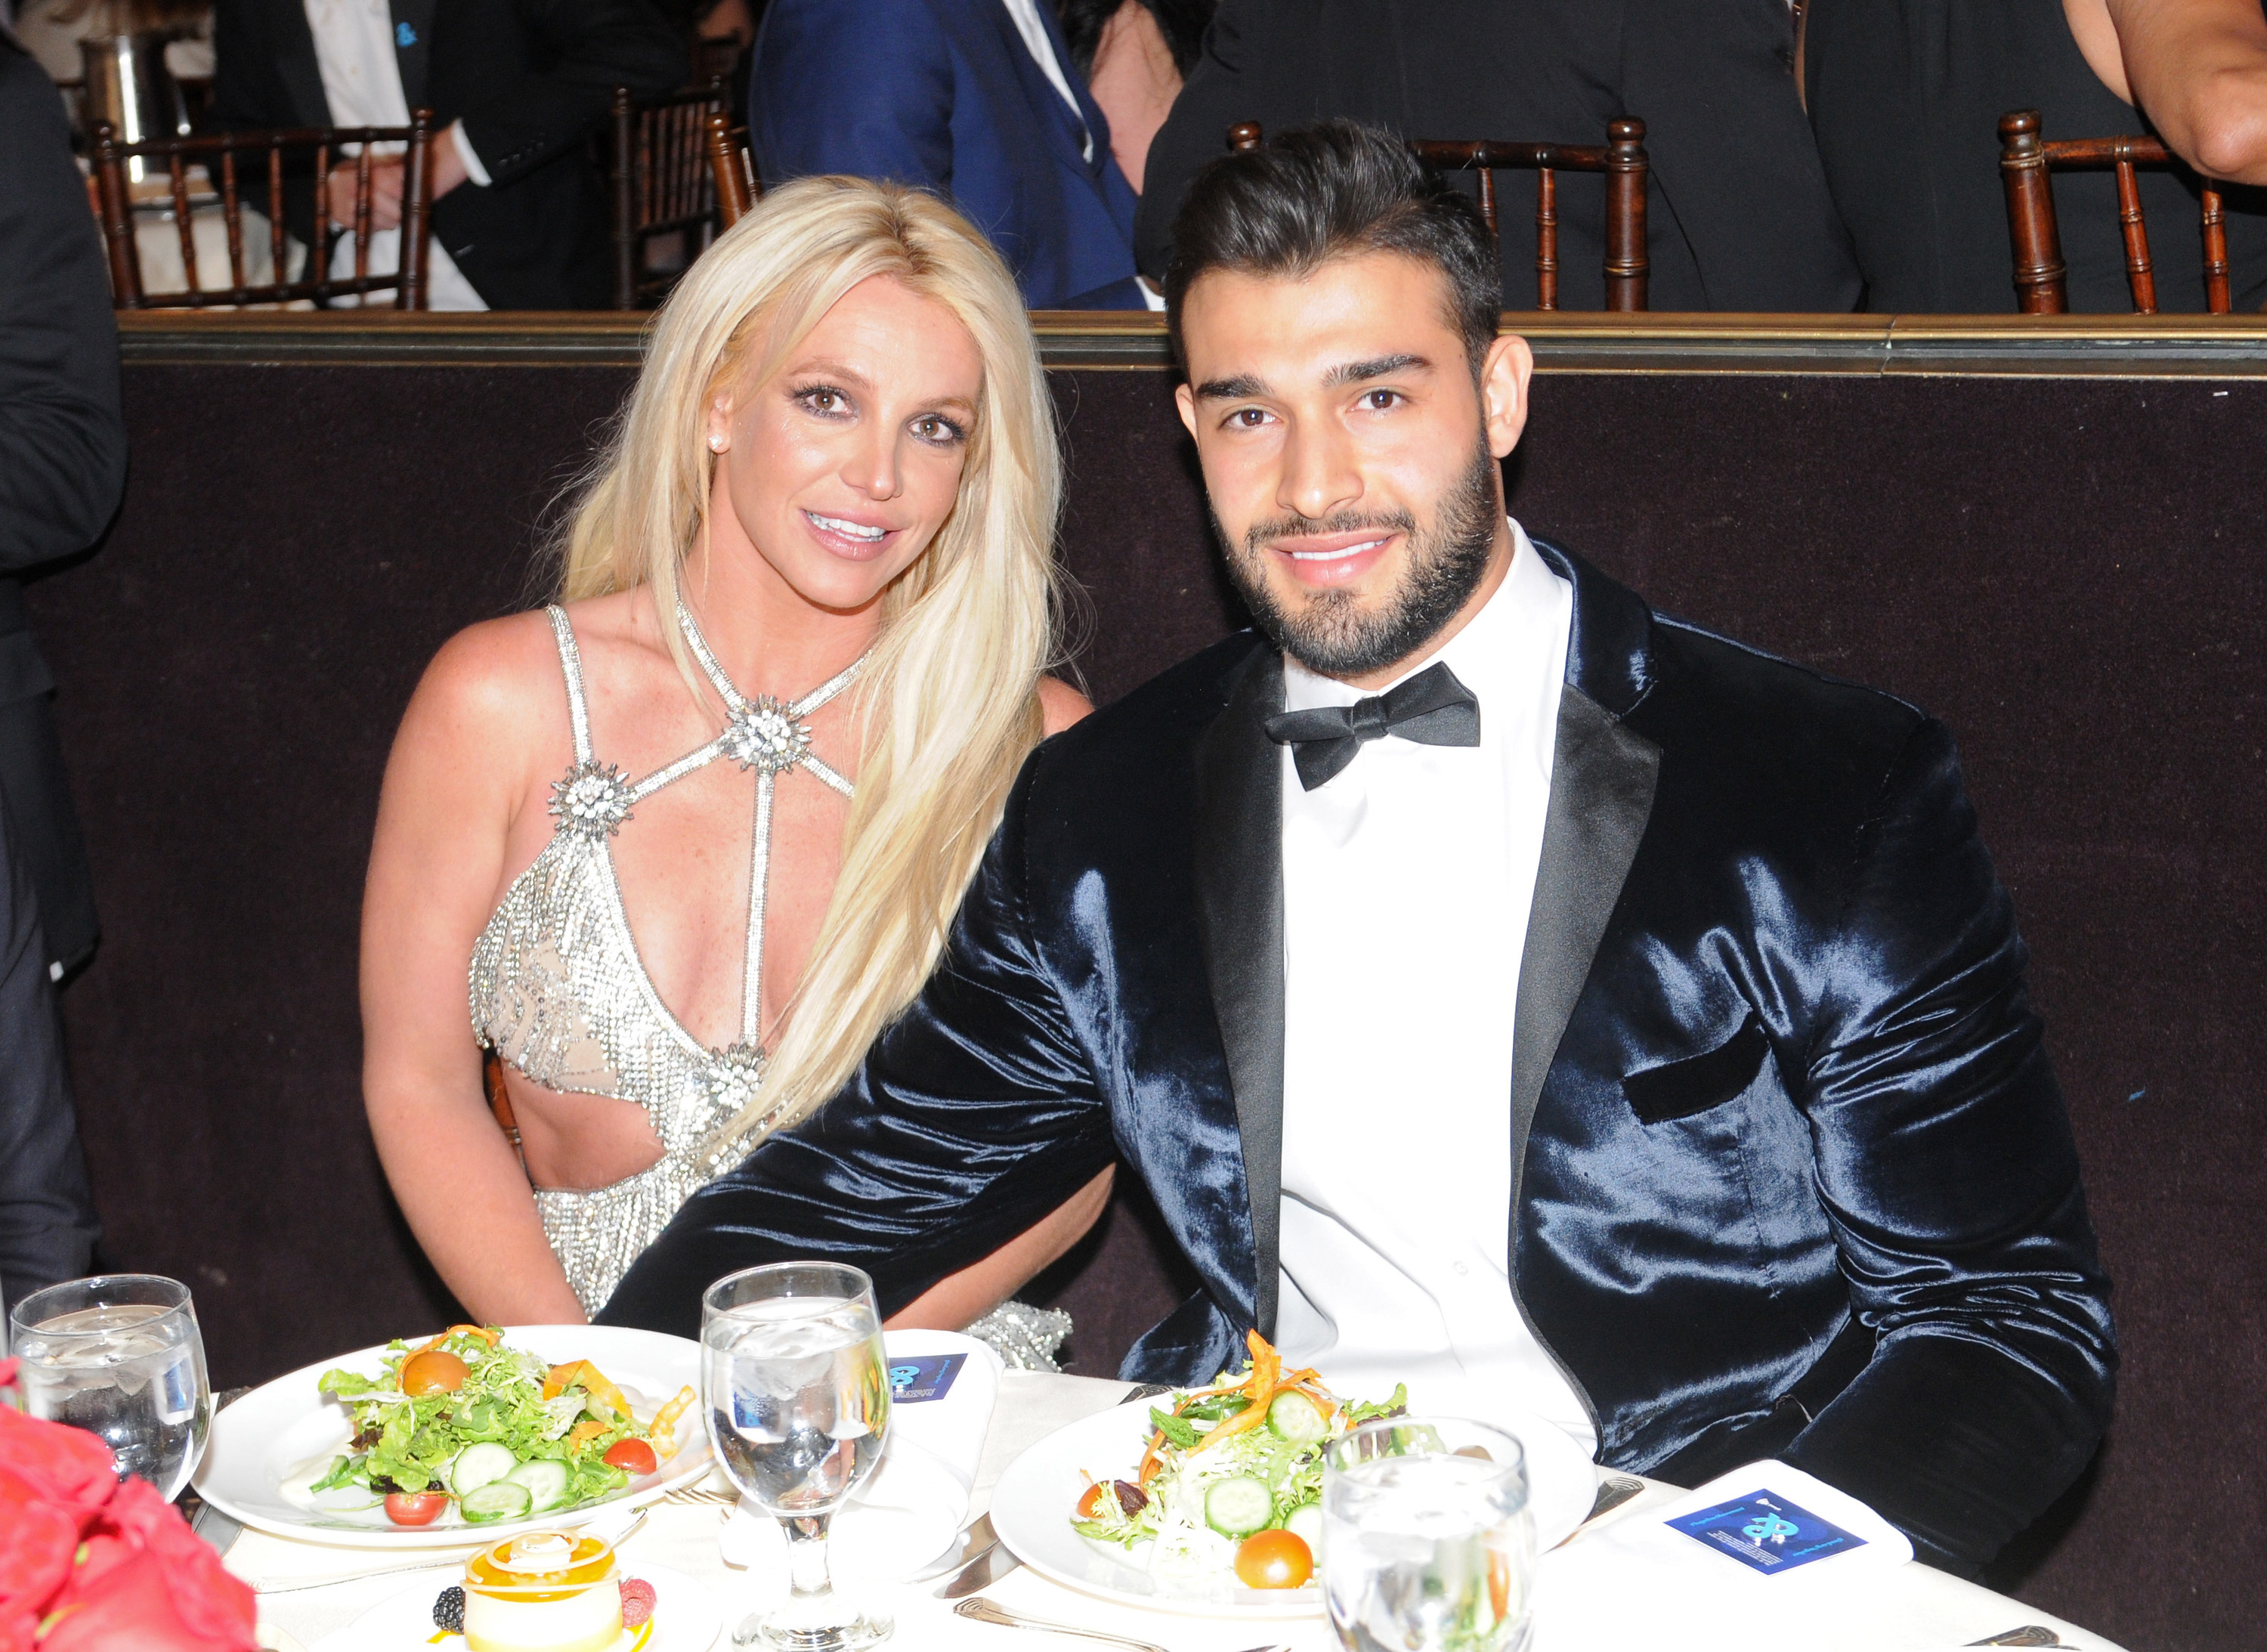 Sam and Britney at a dinner event